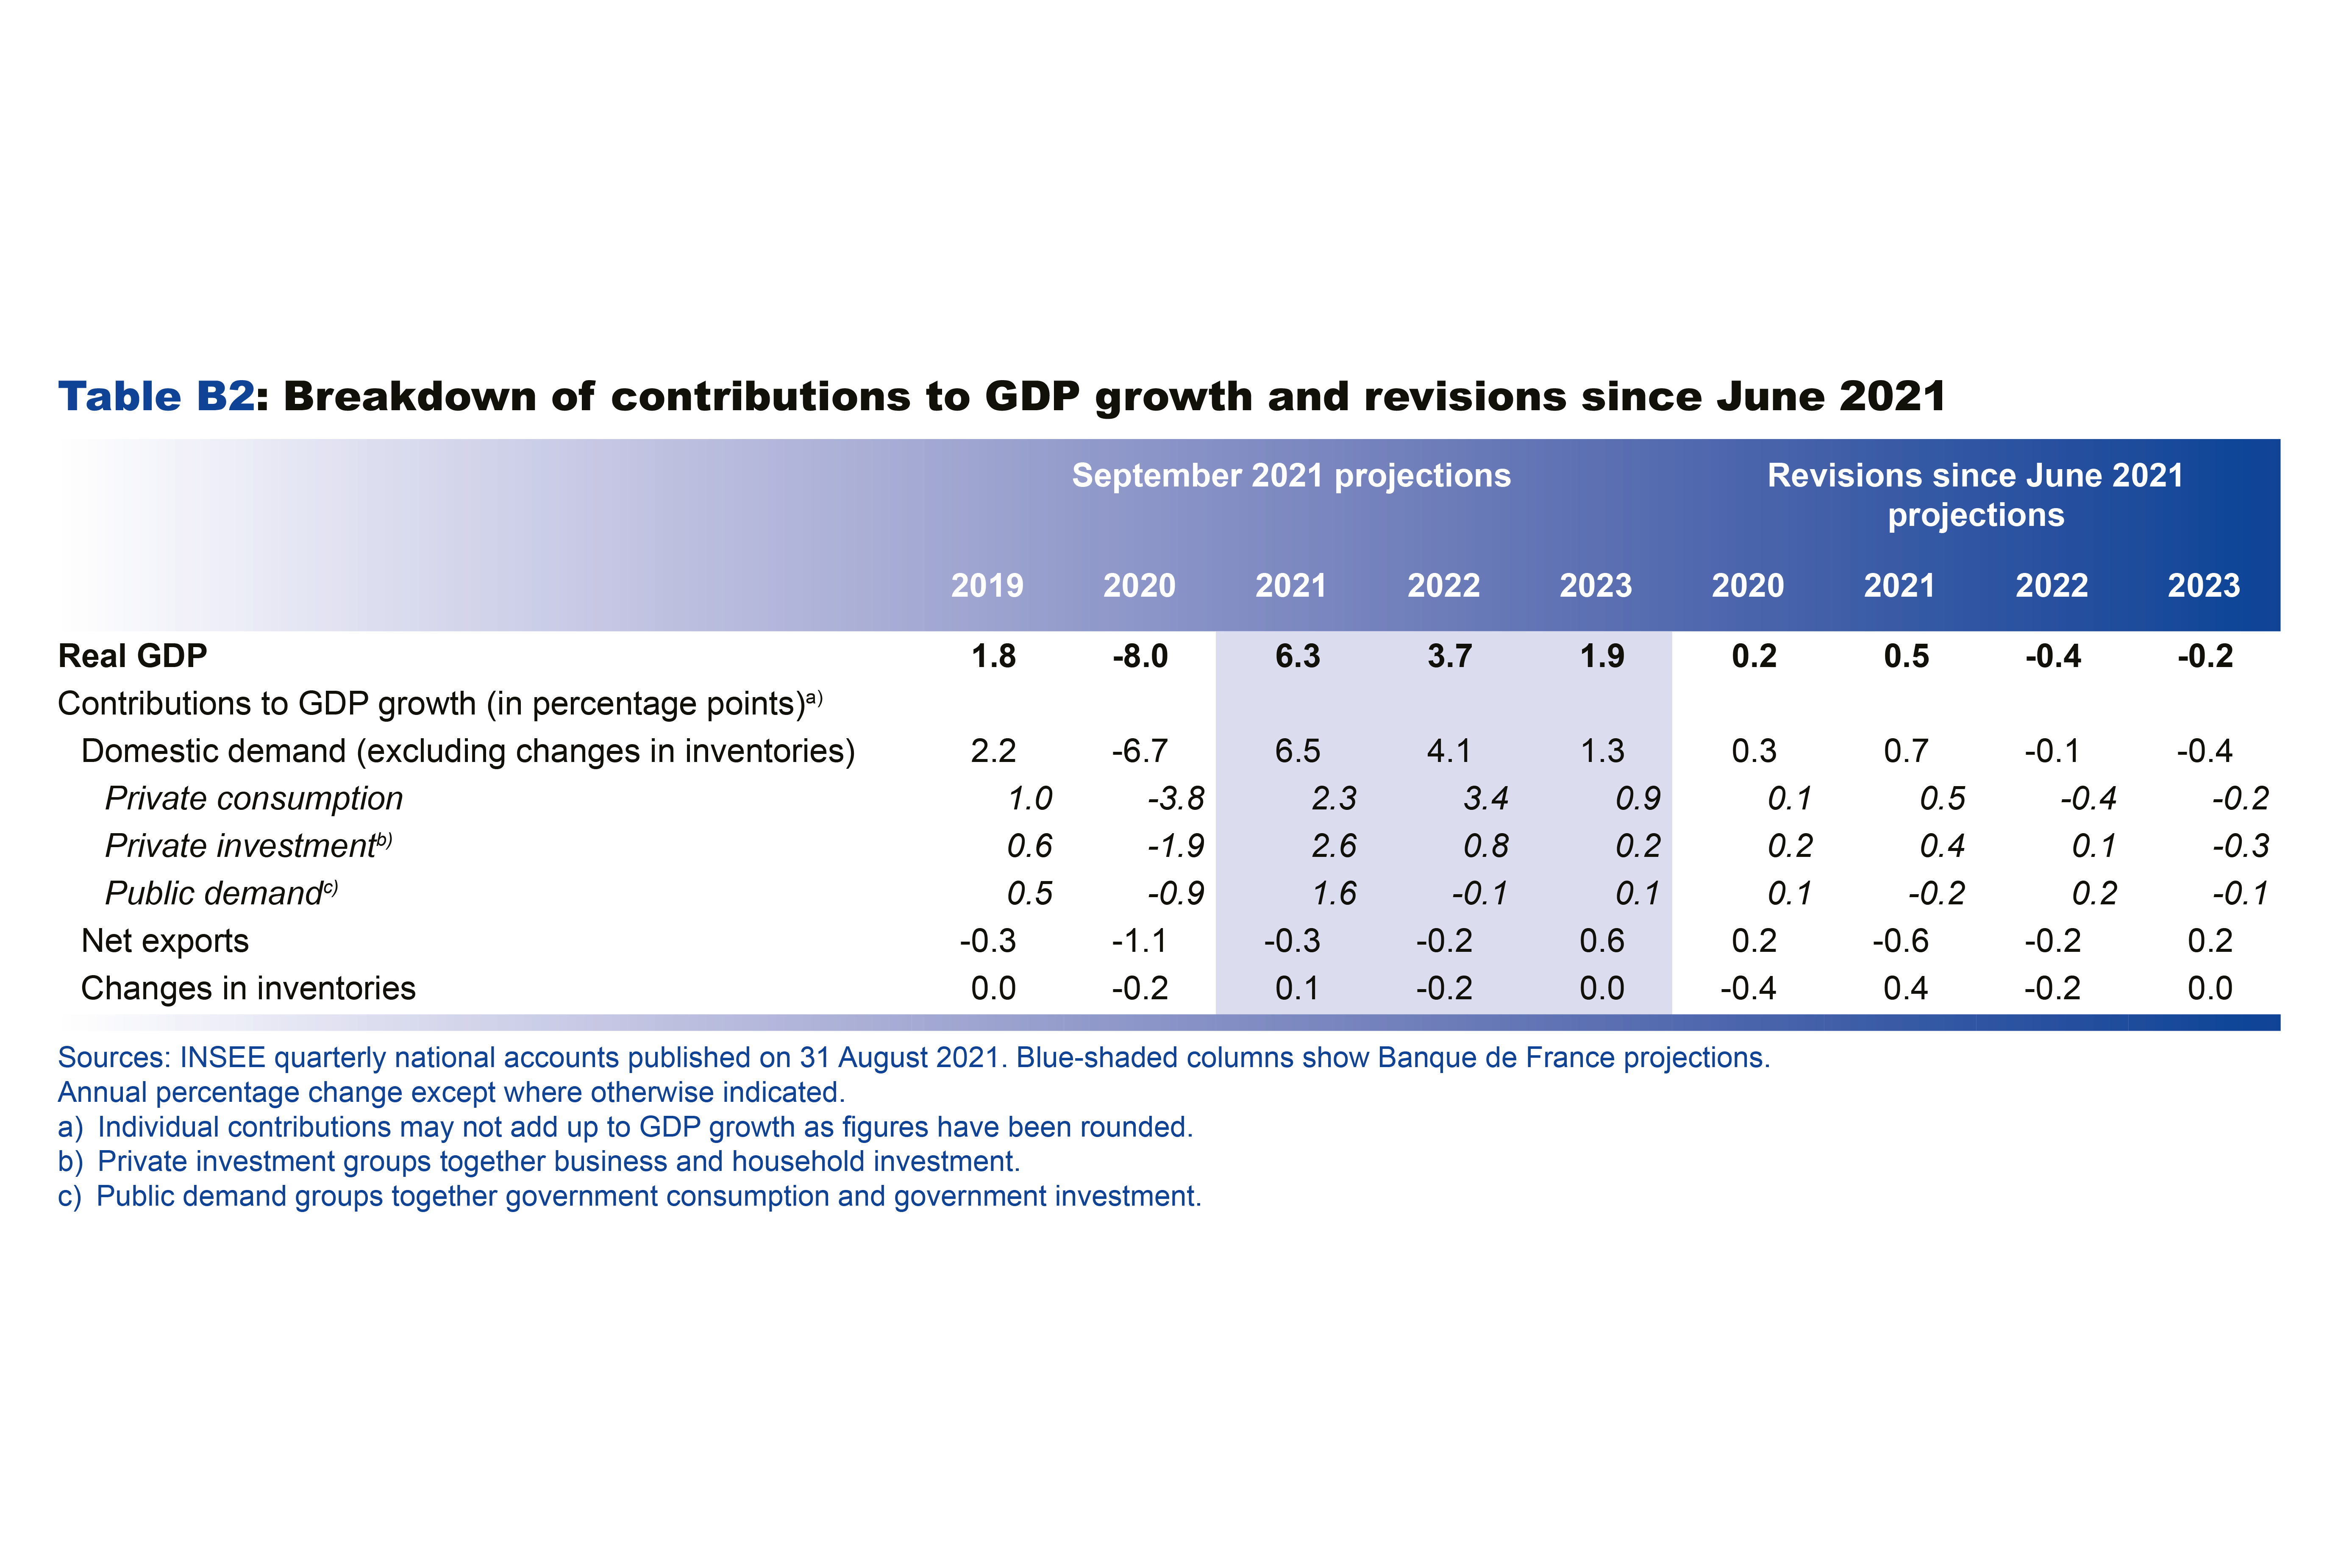 Macroeconomic projections – September 2021 - Breakdown of contributions to GDP growth and revisions since June 2021